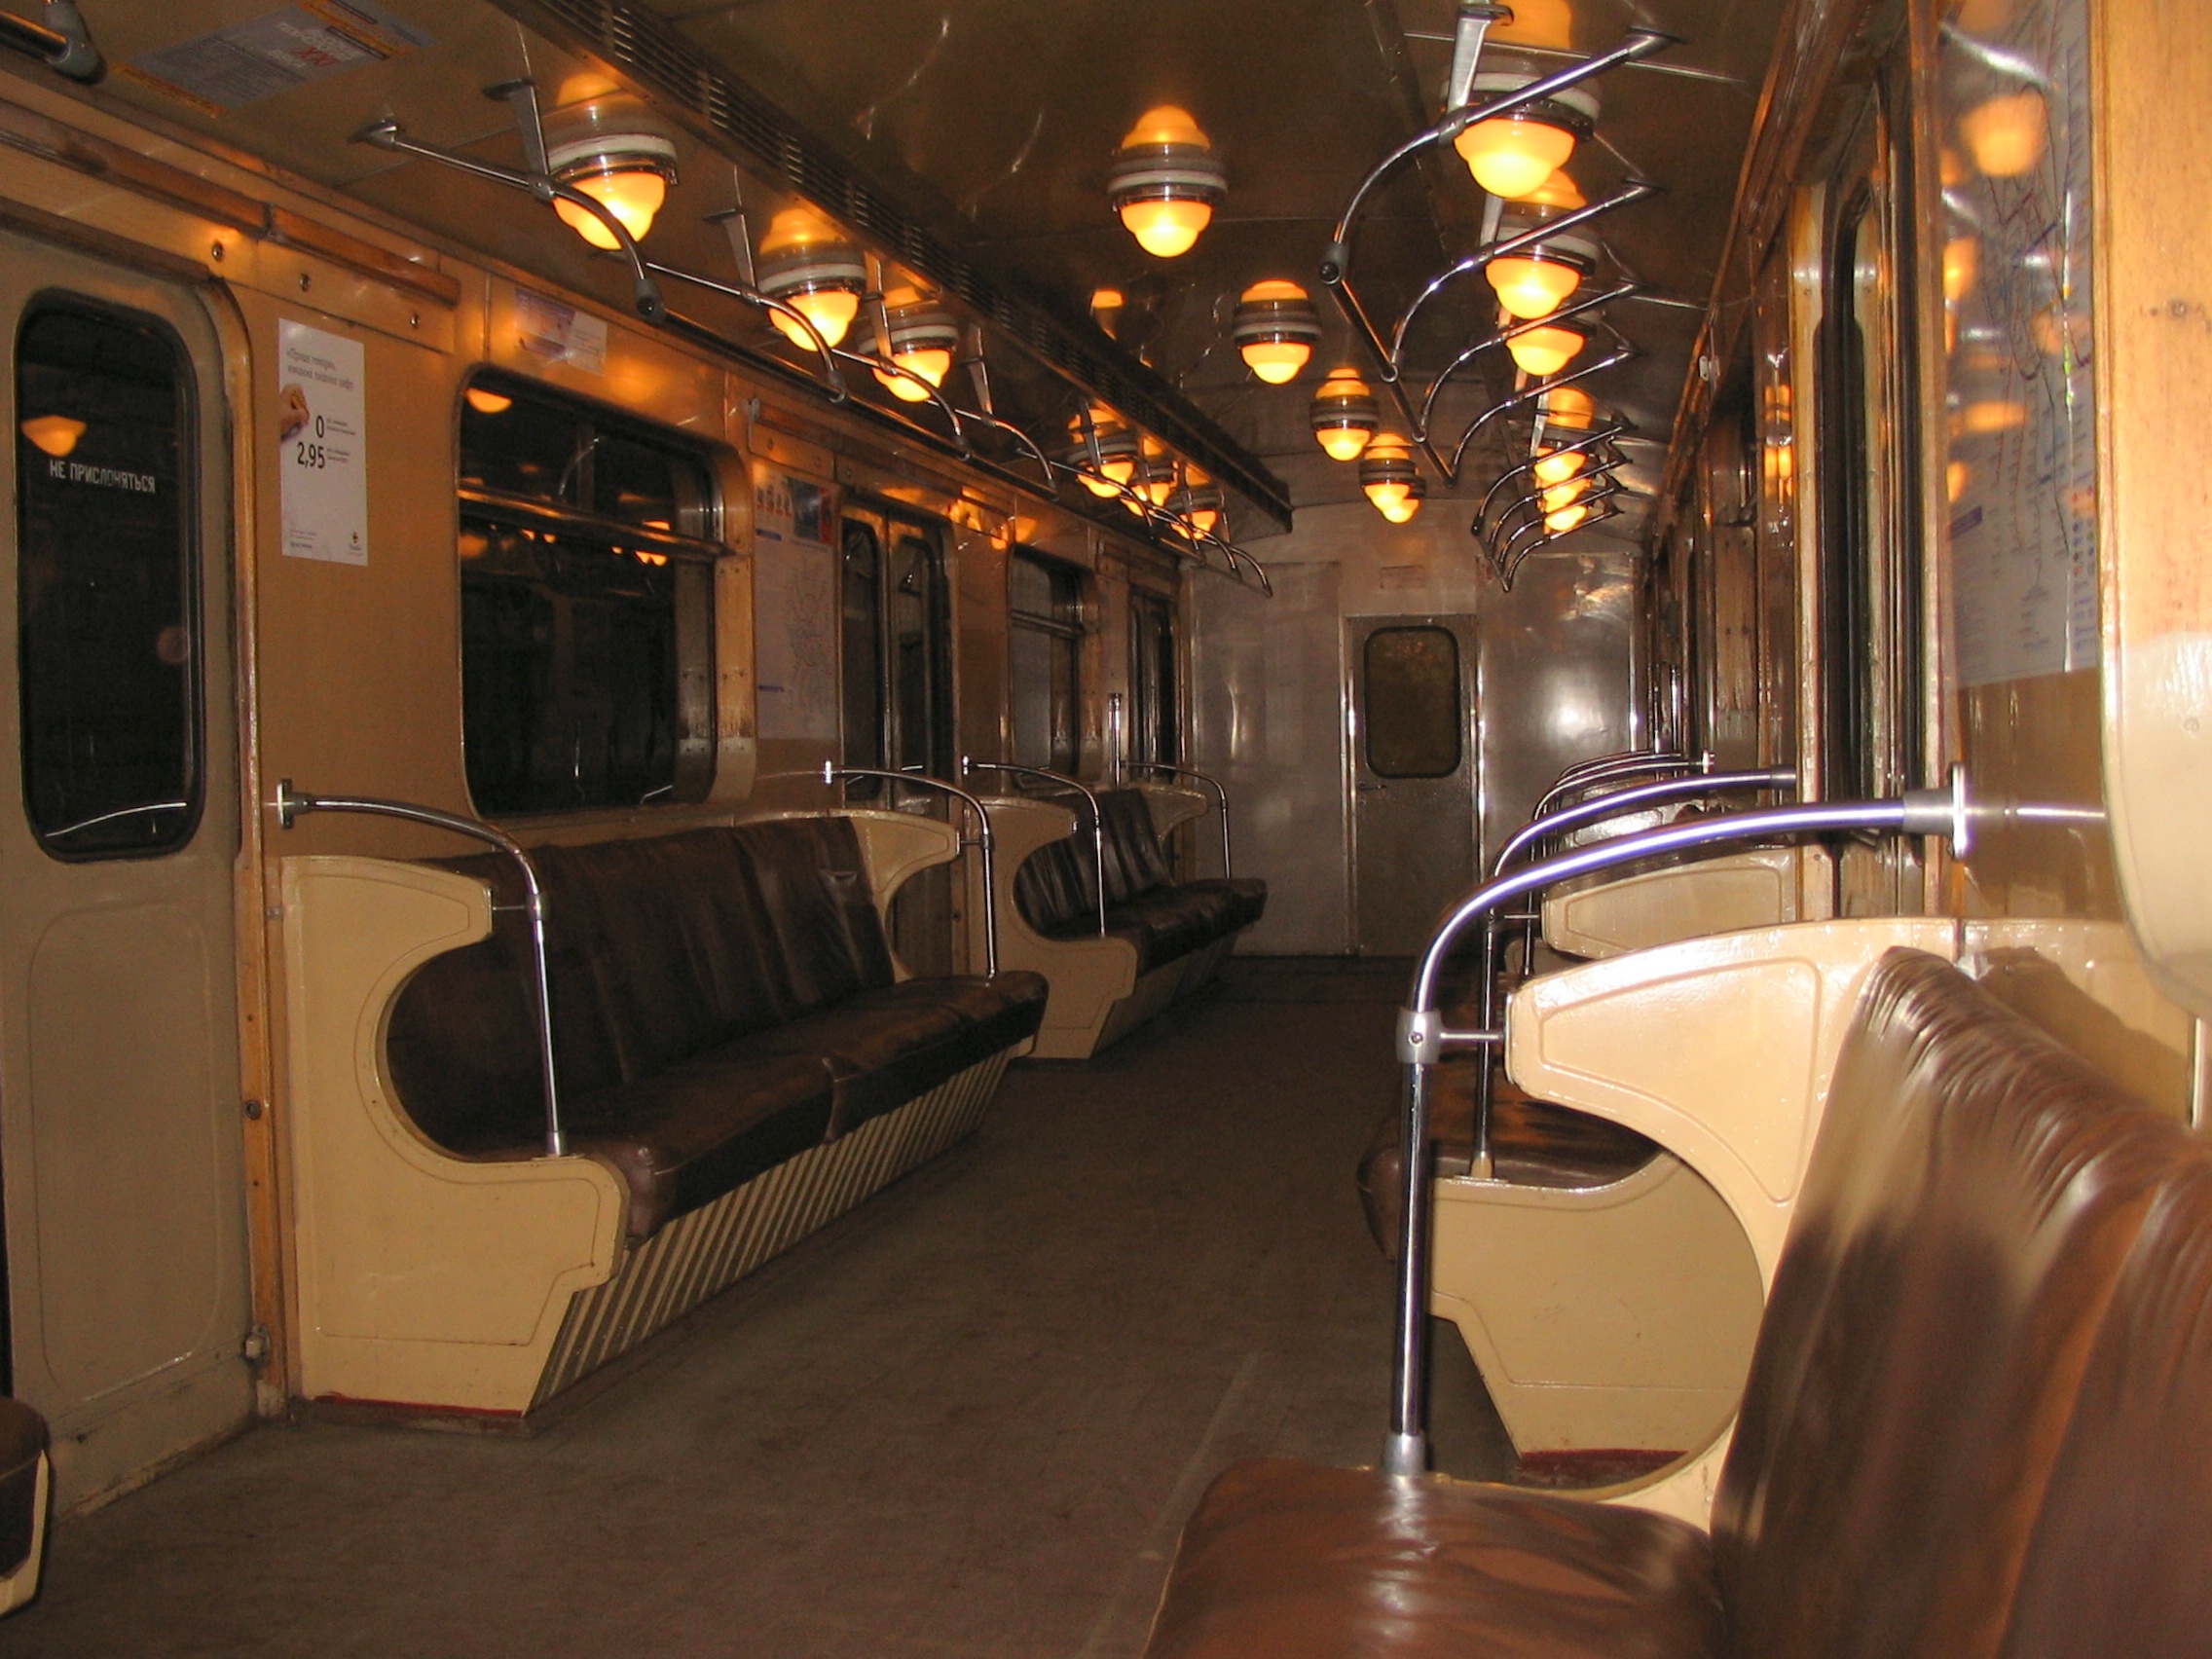 Moscow_metro_car_from_inside